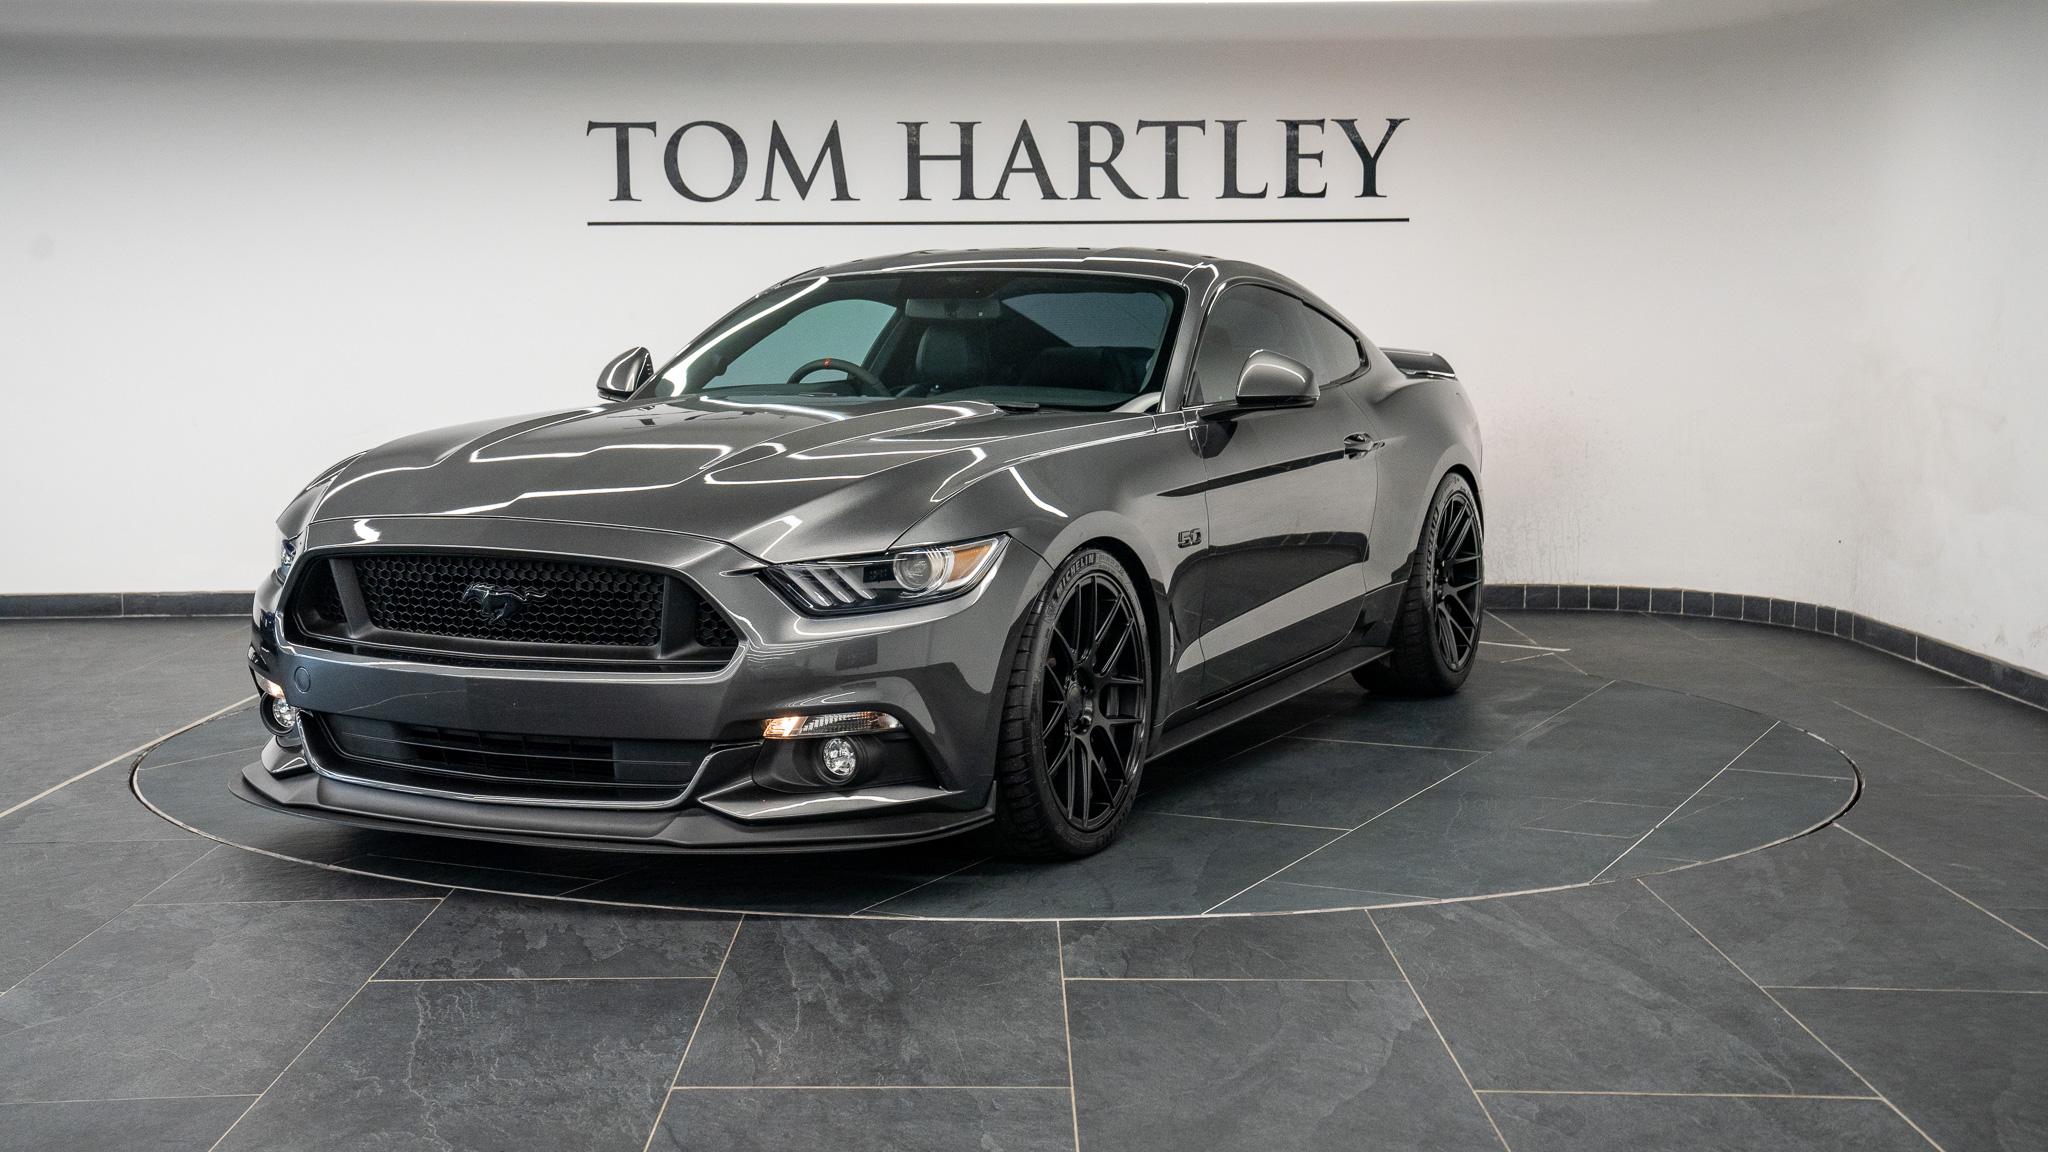 Used 2017 Ford Mustang GT Steeda Q750 StreetFighter £POA 15,000 miles  Magnetic Grey | Tom Hartley